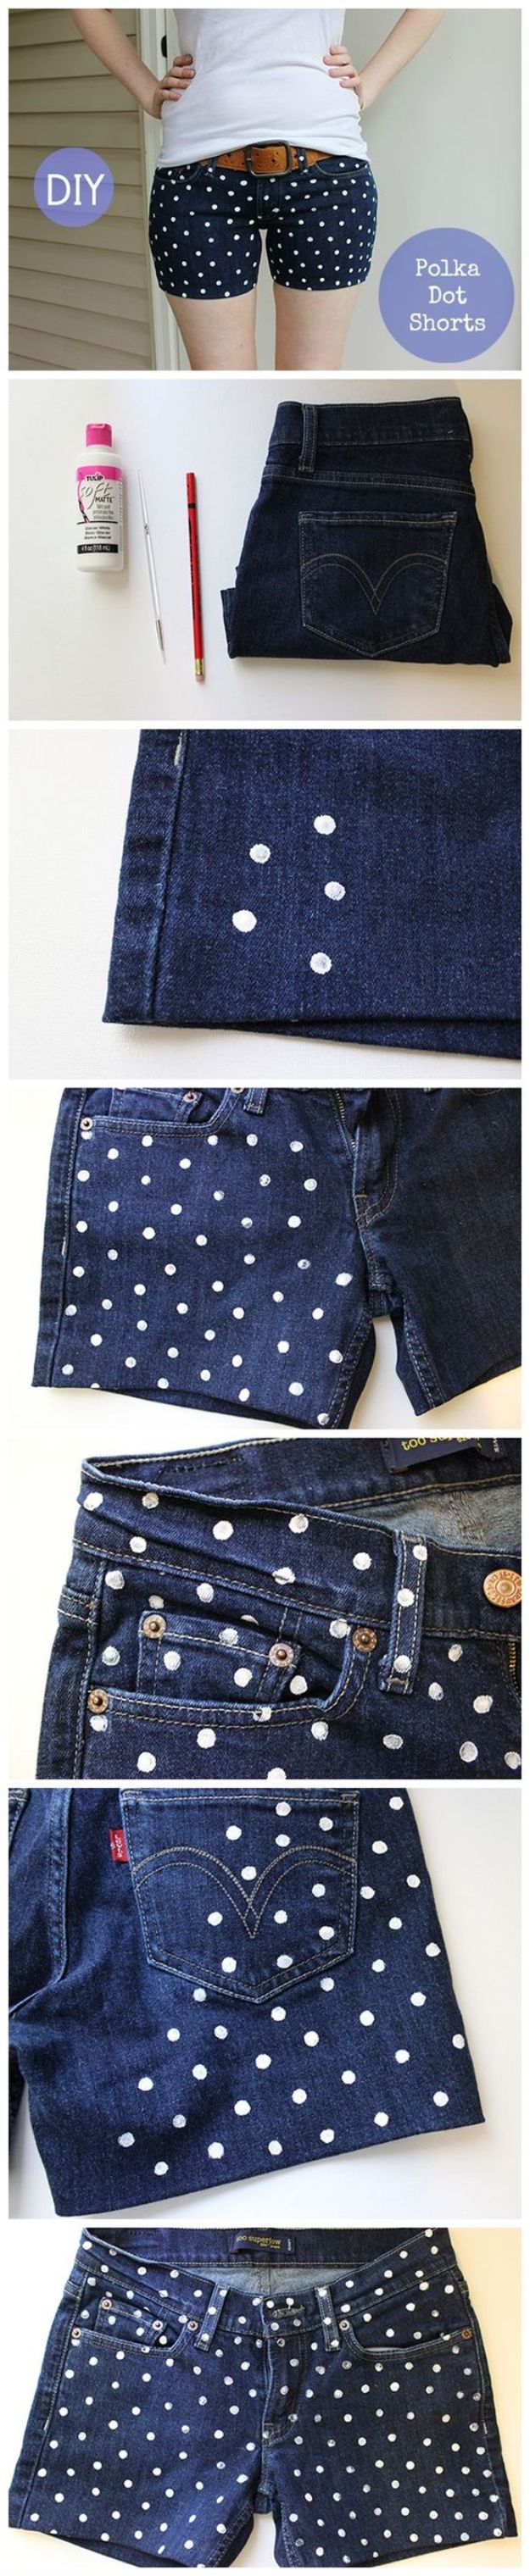 No Sew DIY Fashion Ideas - DIY Polka Dot Shorts - Easy No Sew Projects to Make for Clothes, Shirts, Jeans, Pants, Skirts, Kids Clothing No Sewing Project Ideas 